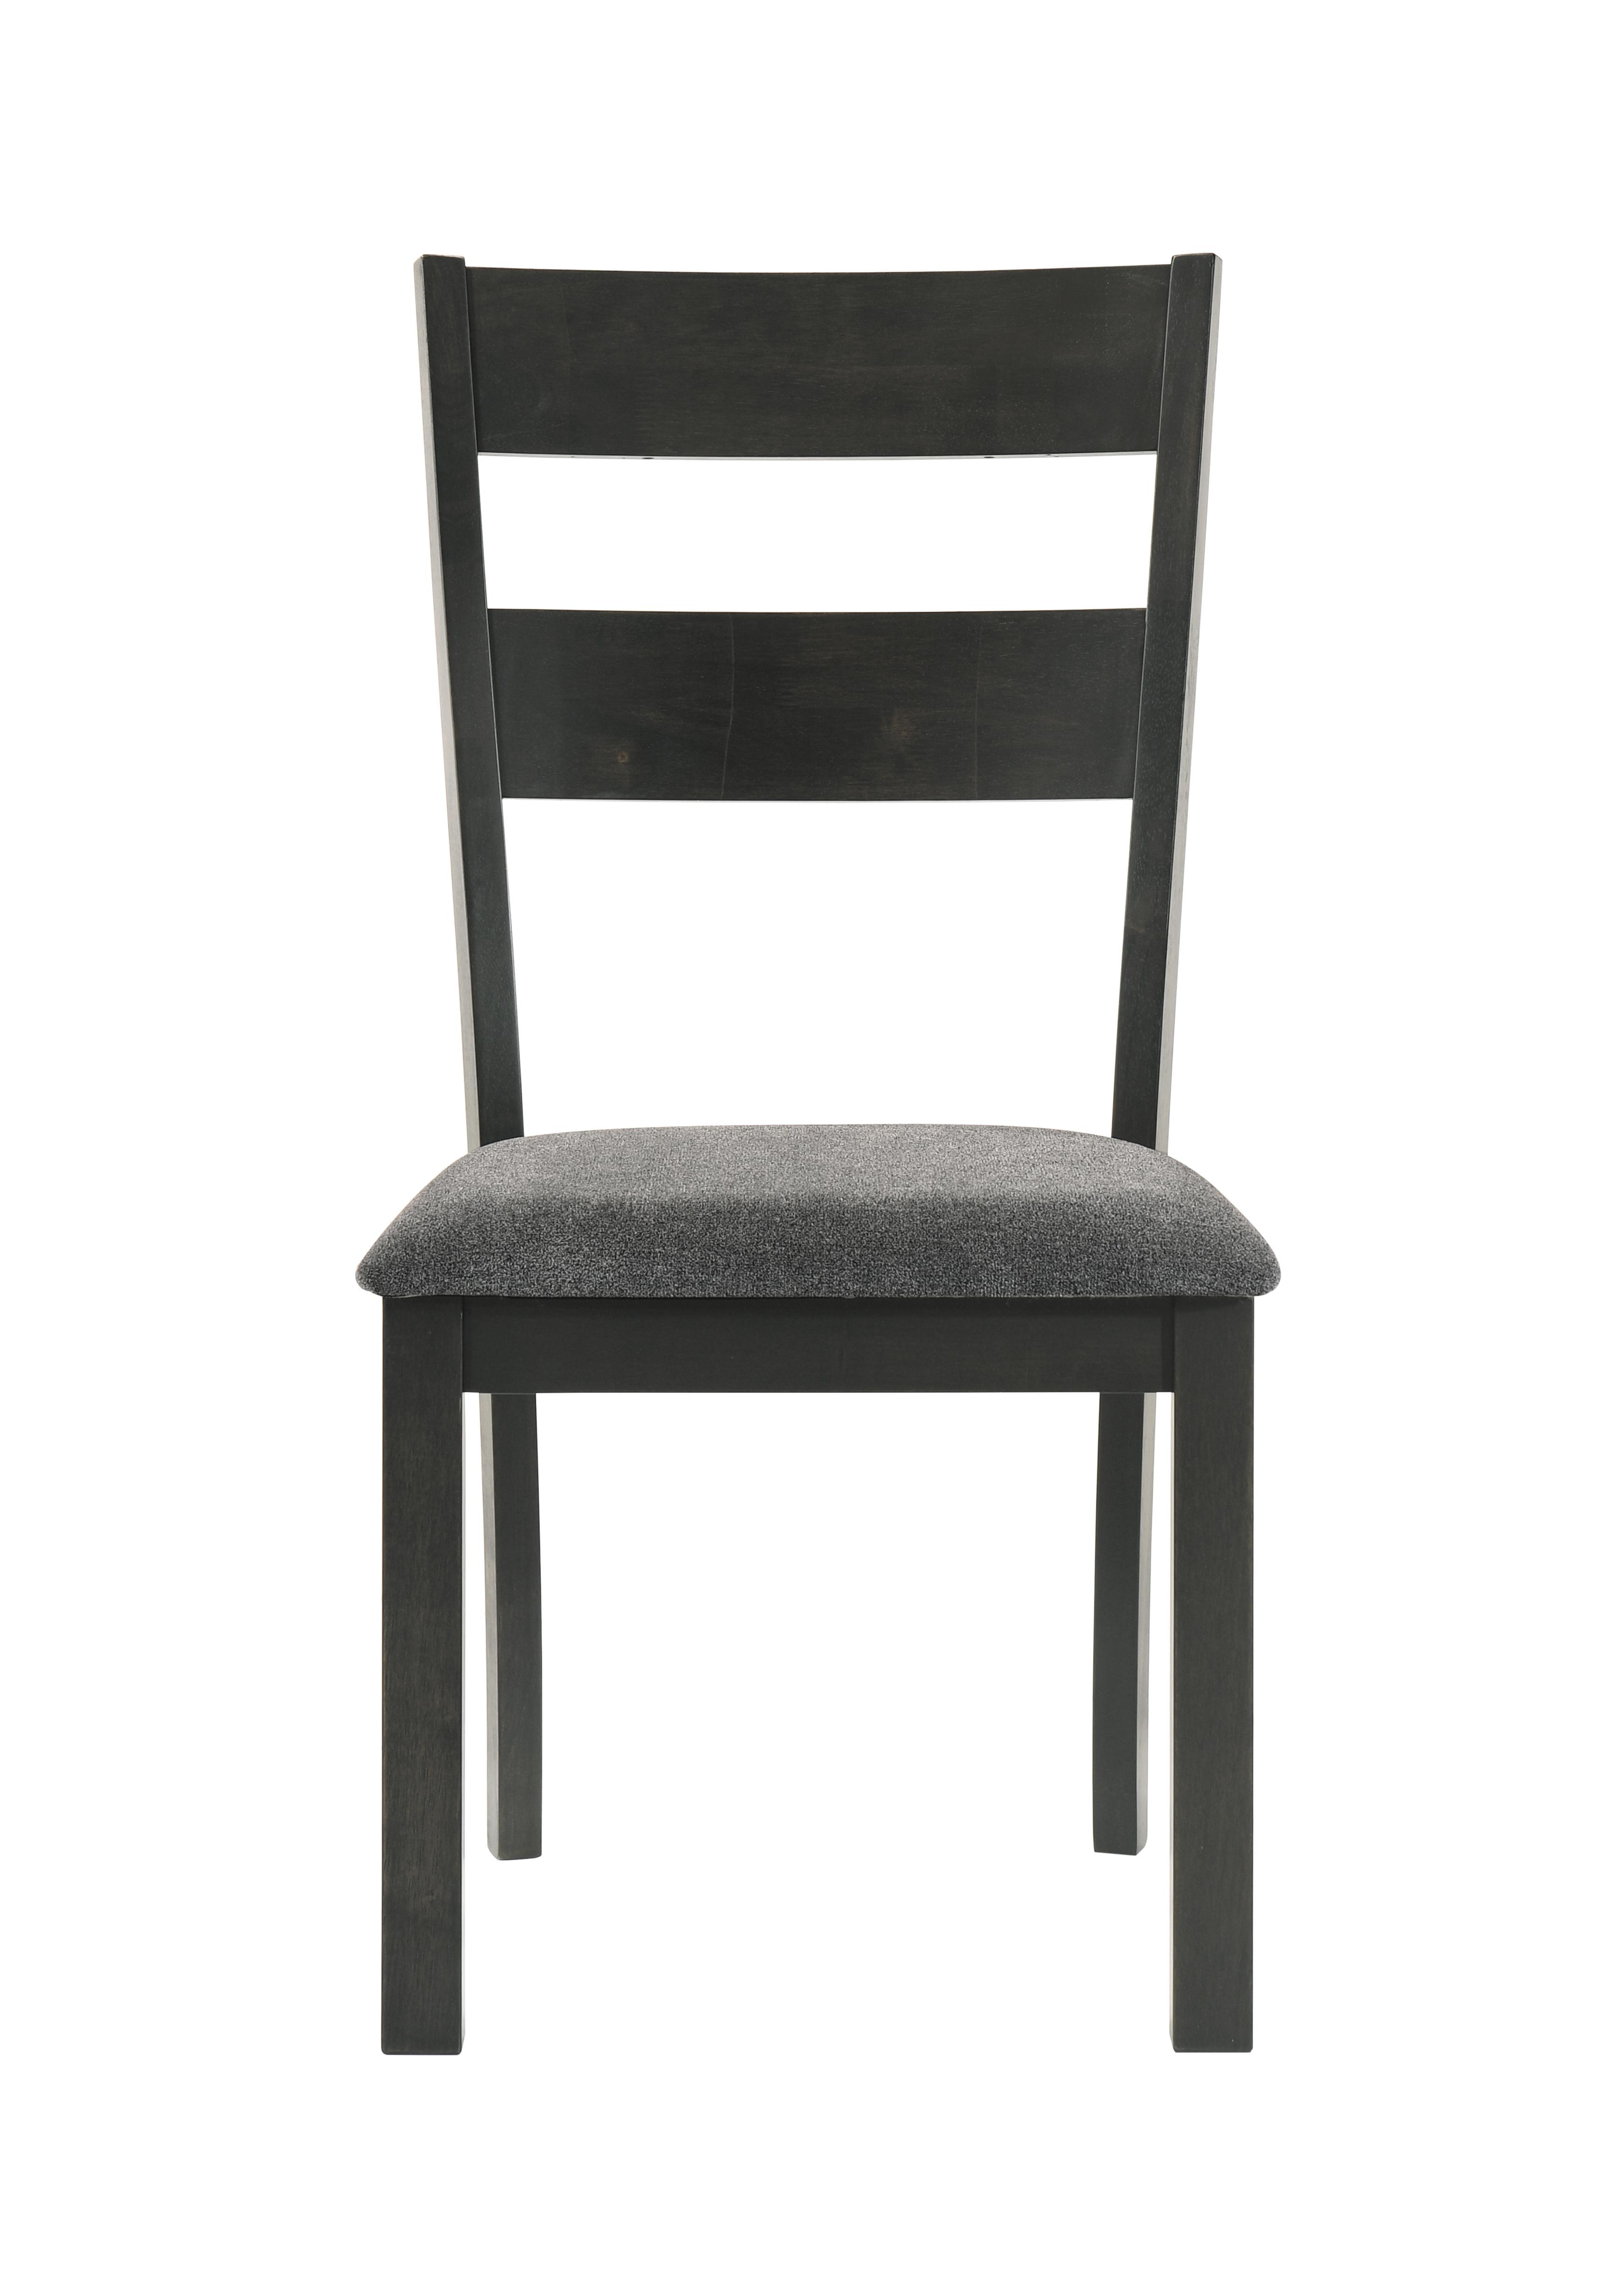 Transitional Side Chair Set 115132 Jakob 115132 in Black Fabric